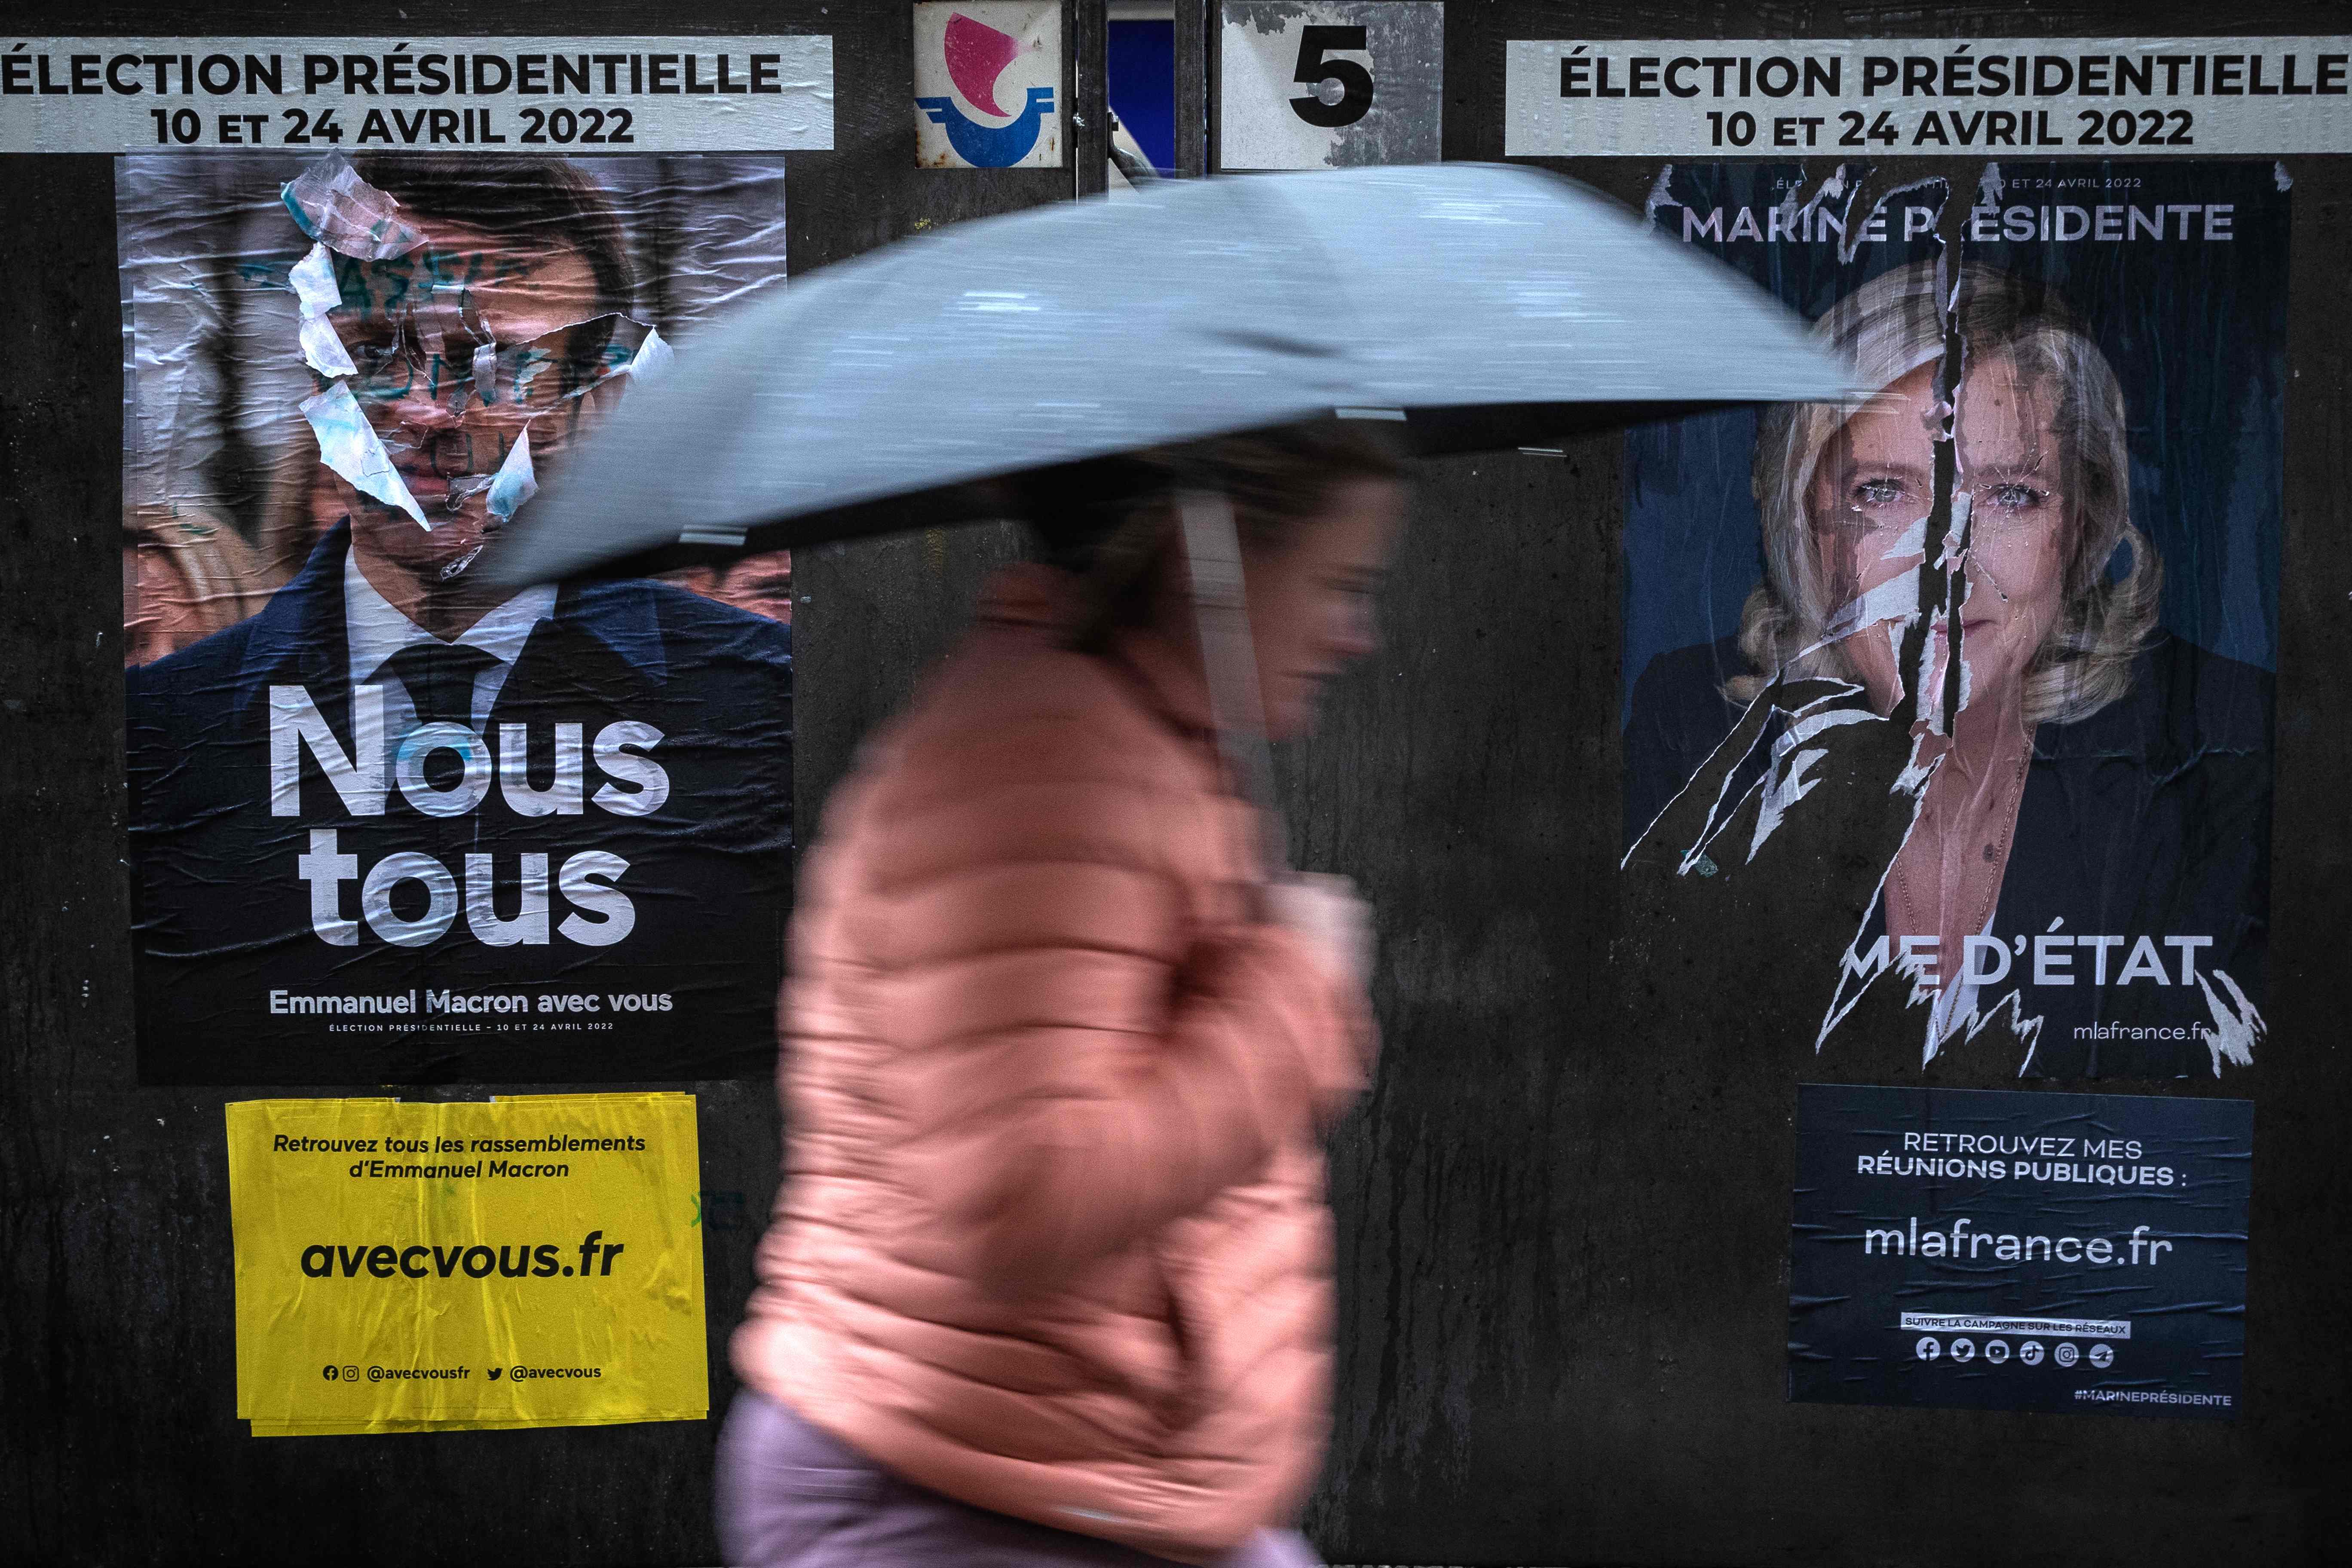 A woman walks past posters for the two candidates in Paris